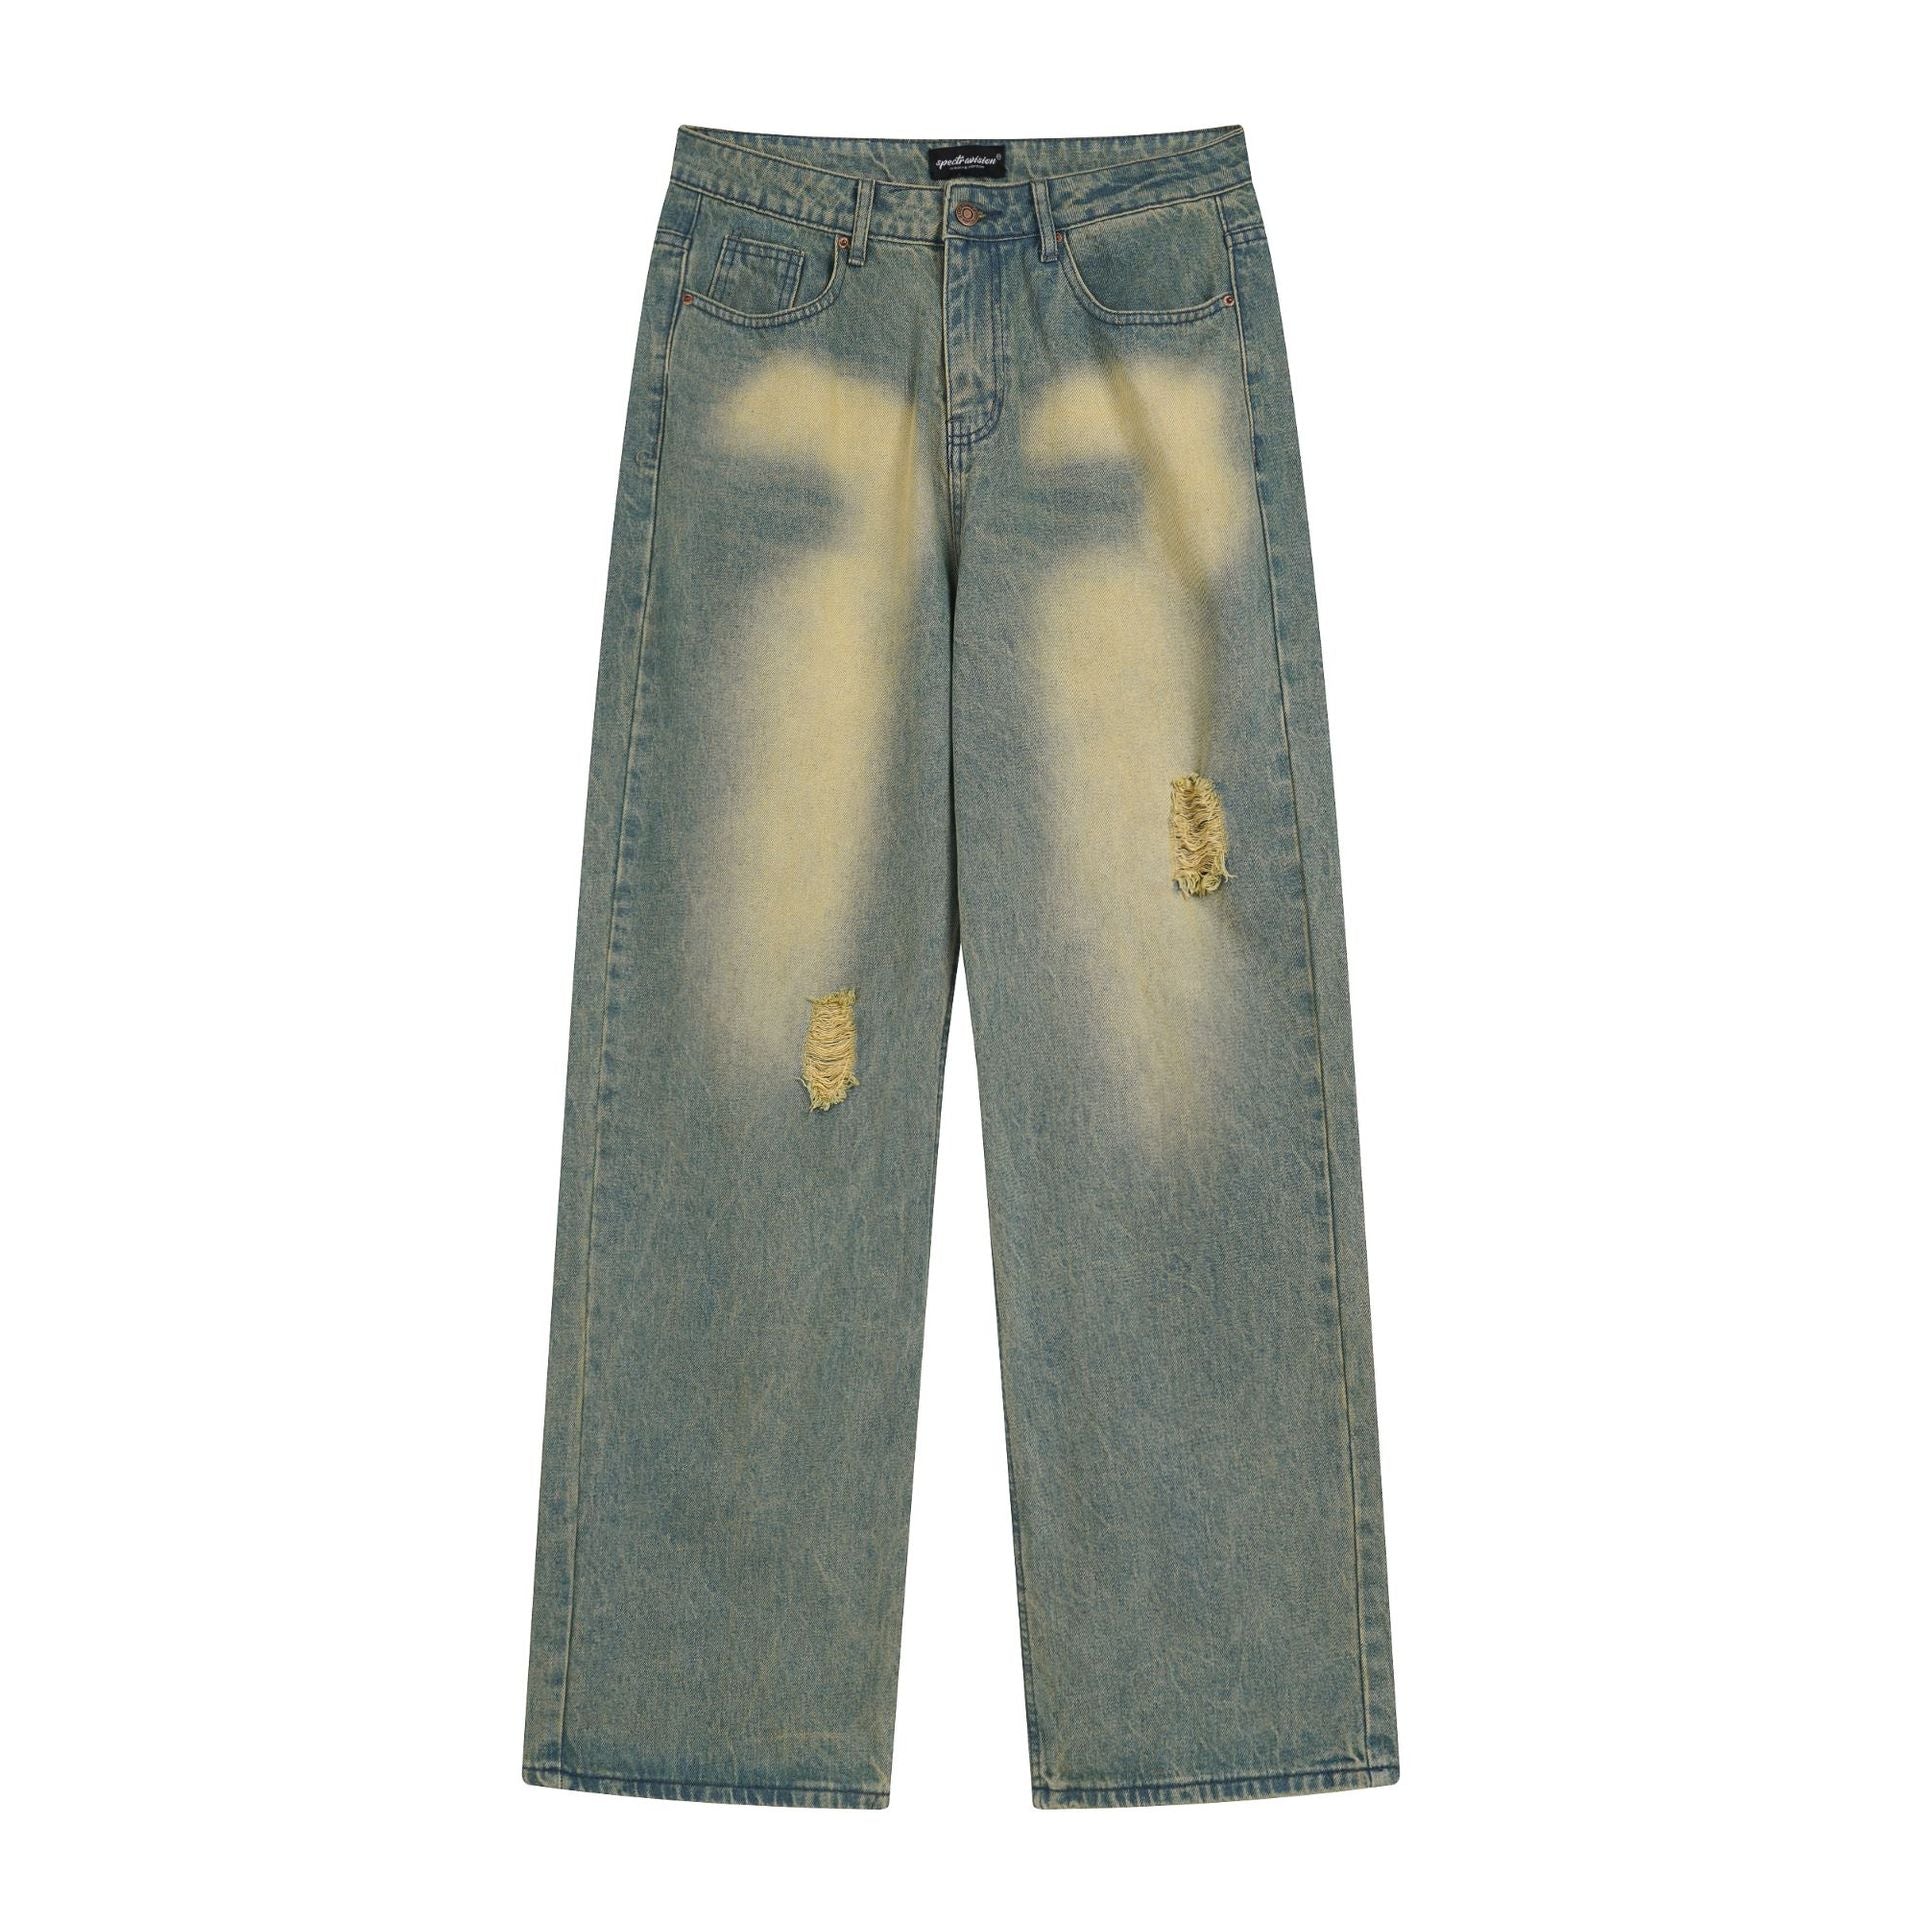 "Distressed Faded Hole" Jeans - Santo 